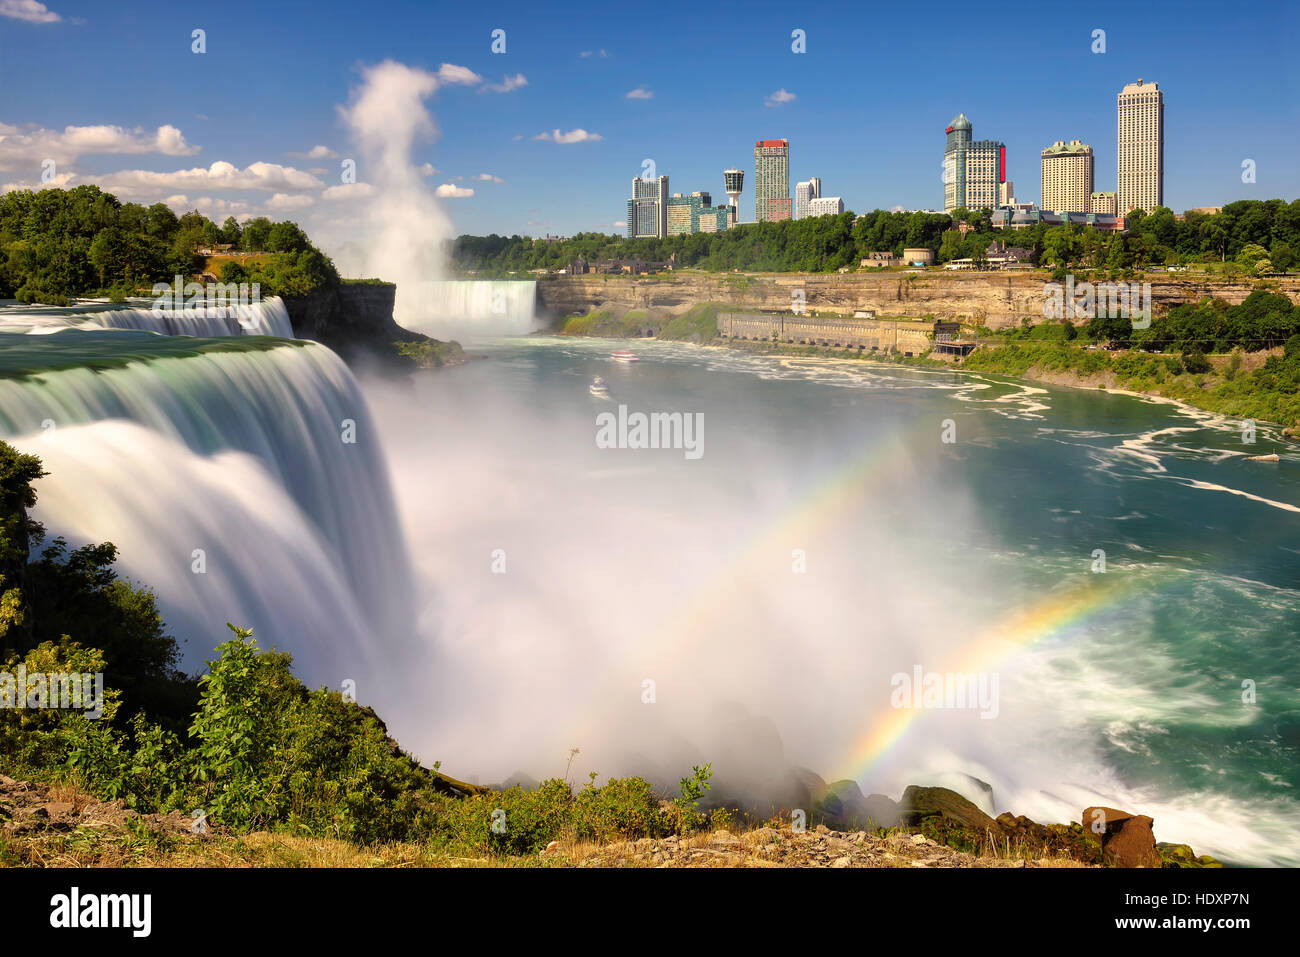 The view of Niagara falls and spectacular rainbow. Stock Photo